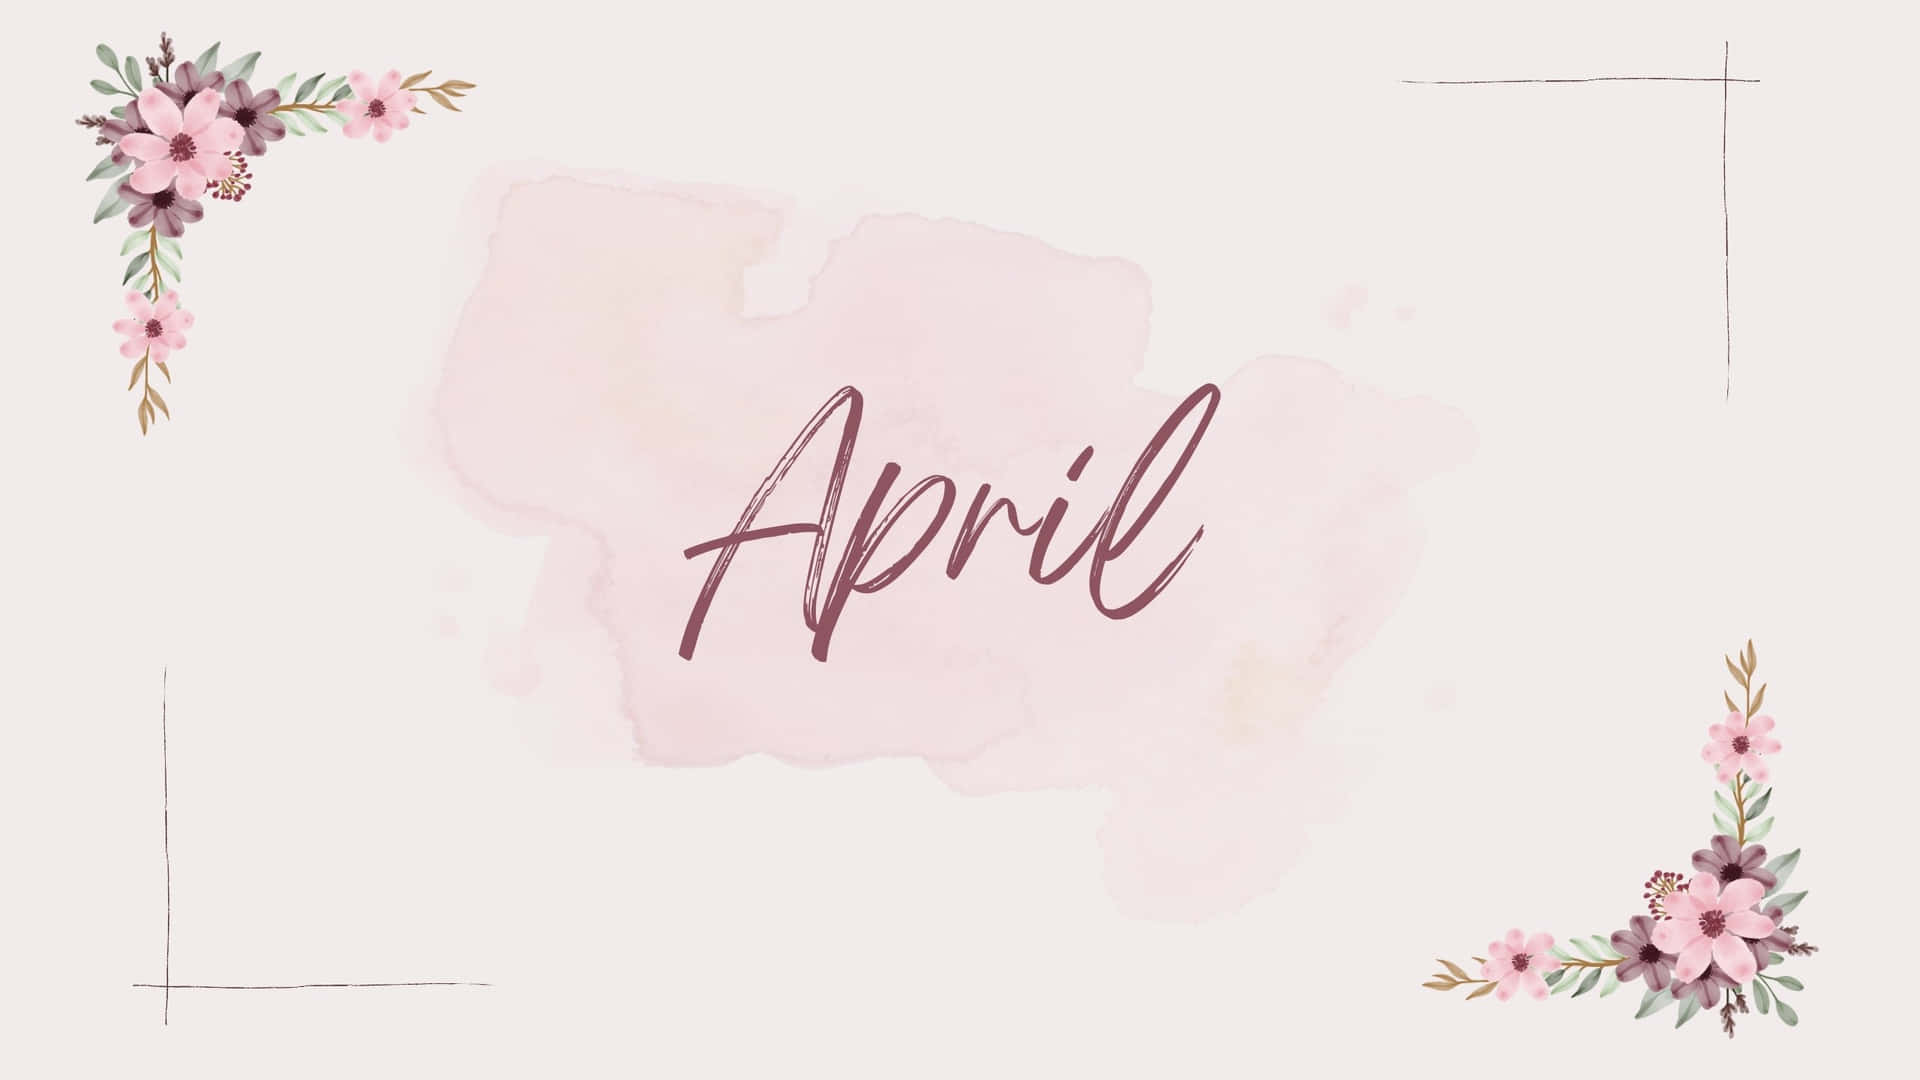 April Floral Aesthetic Background Wallpaper